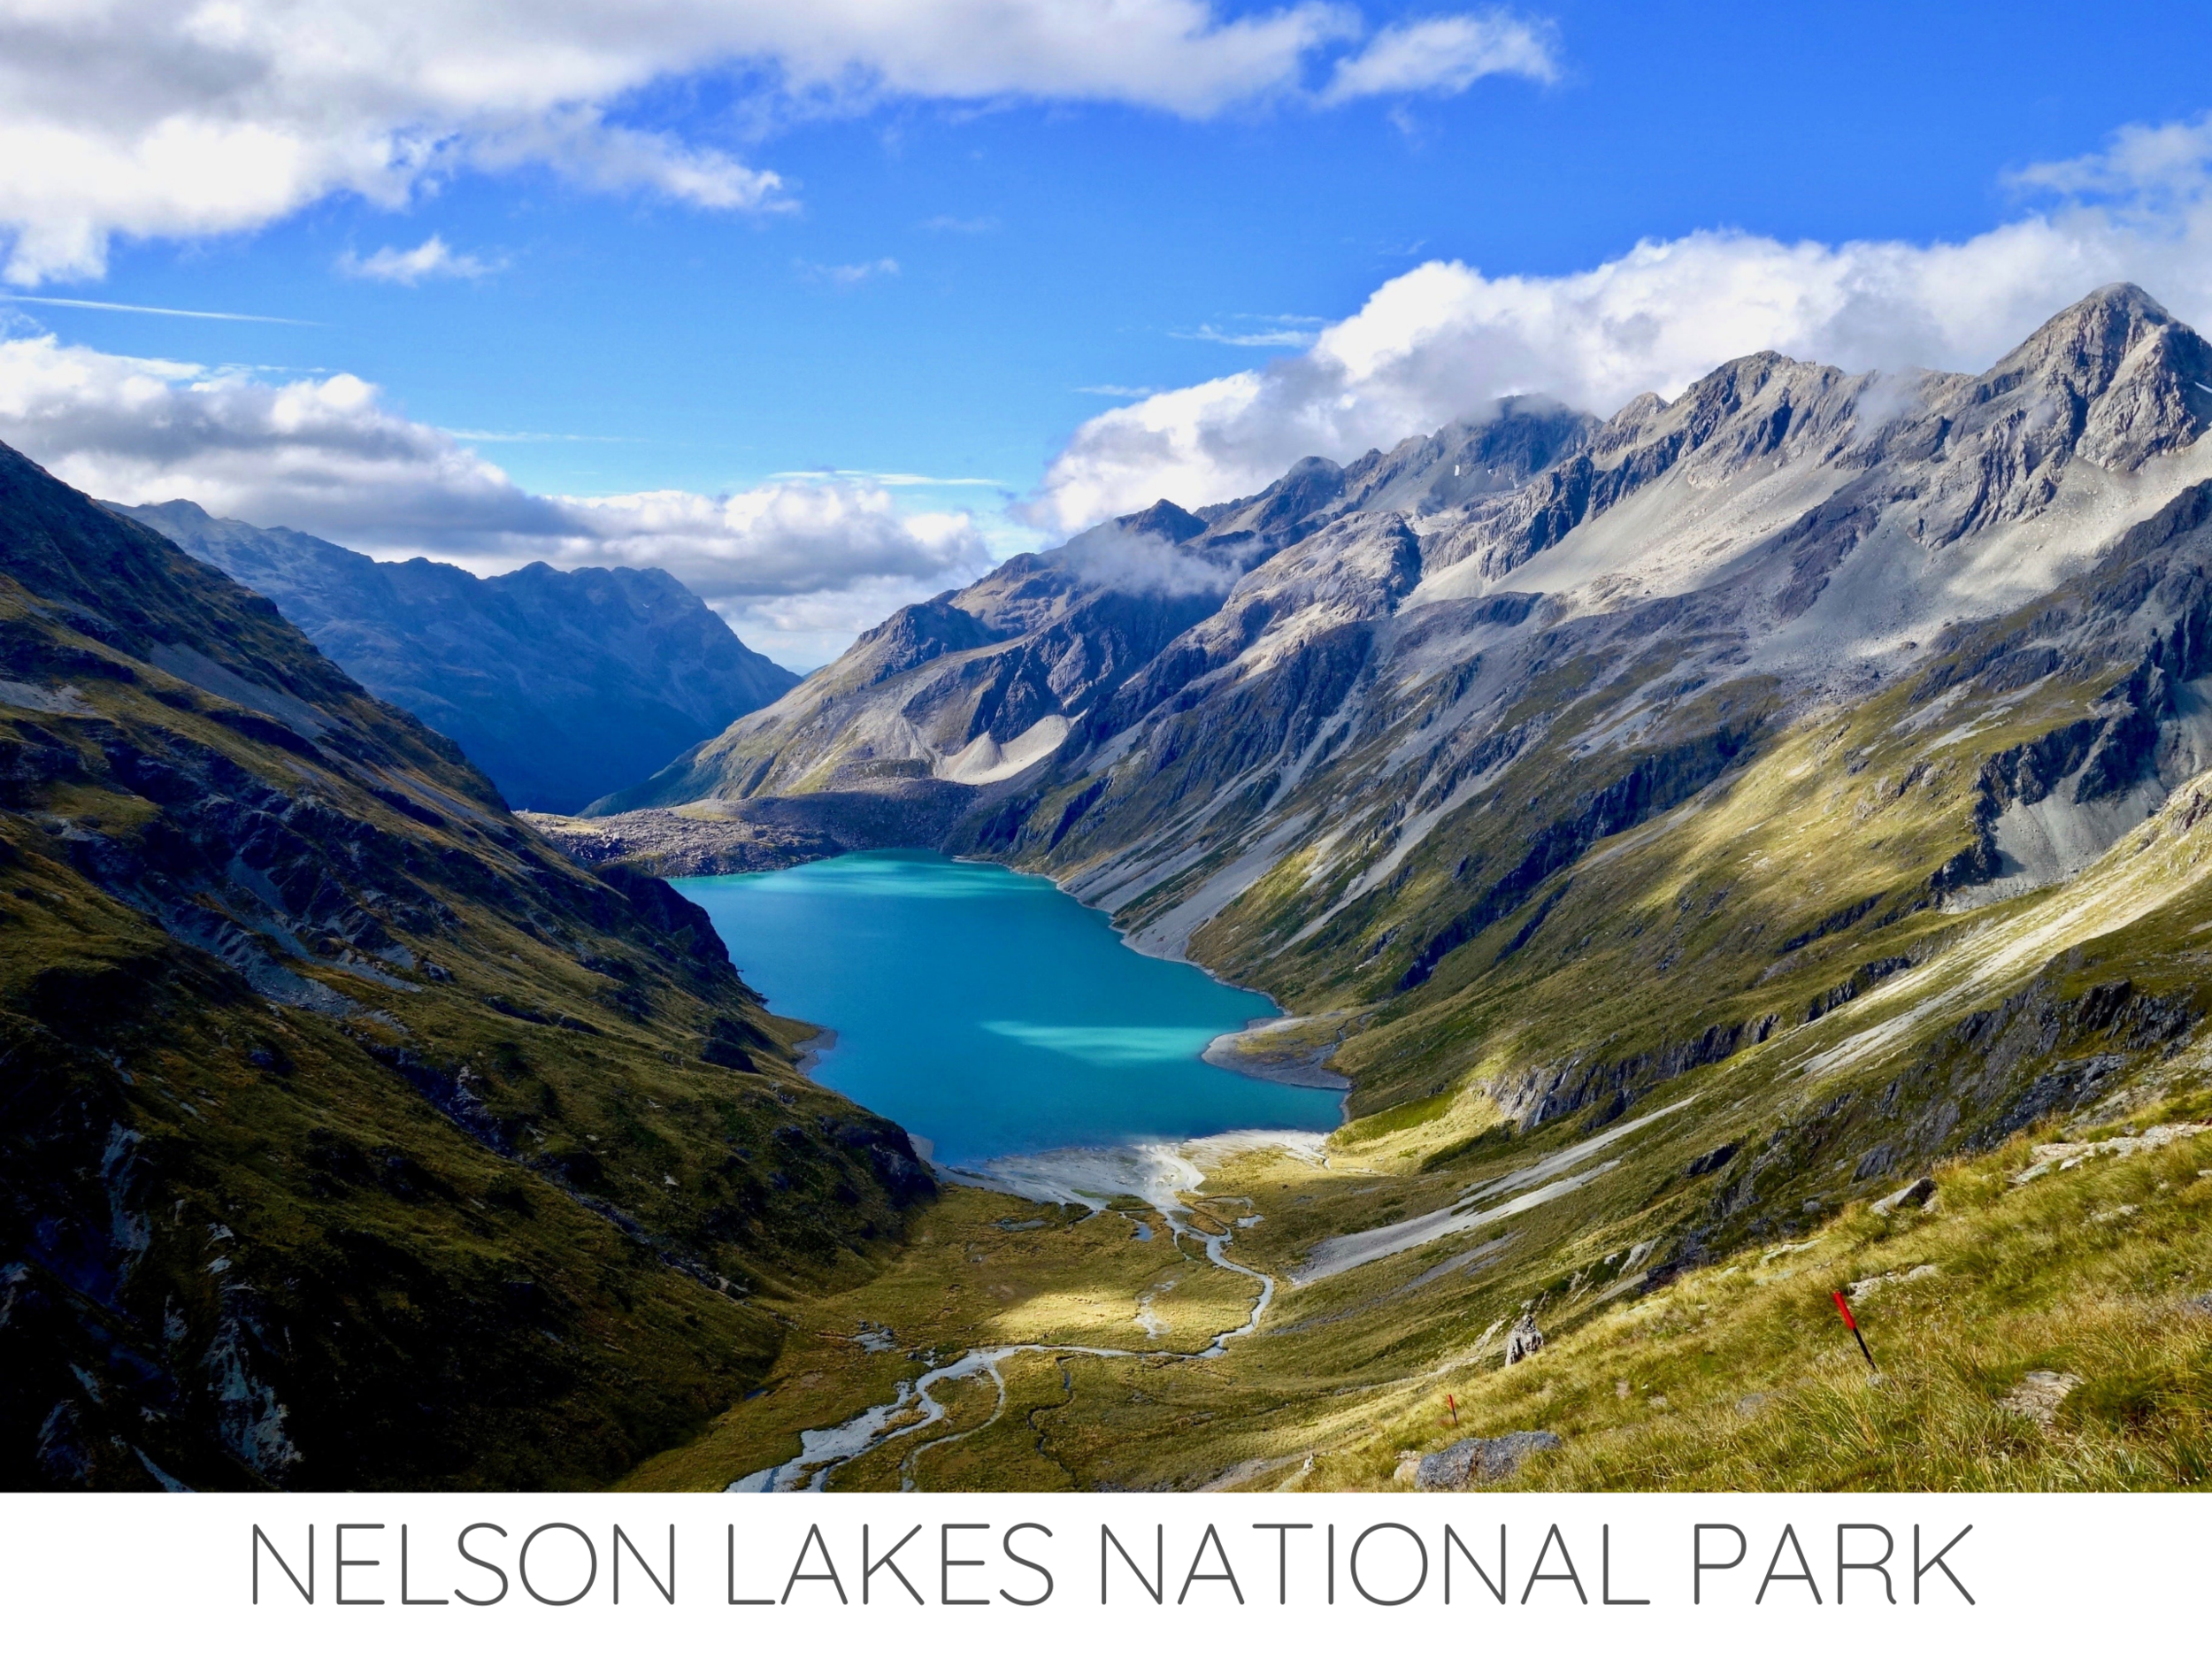 NELSON LAKES NATIONAL PARK